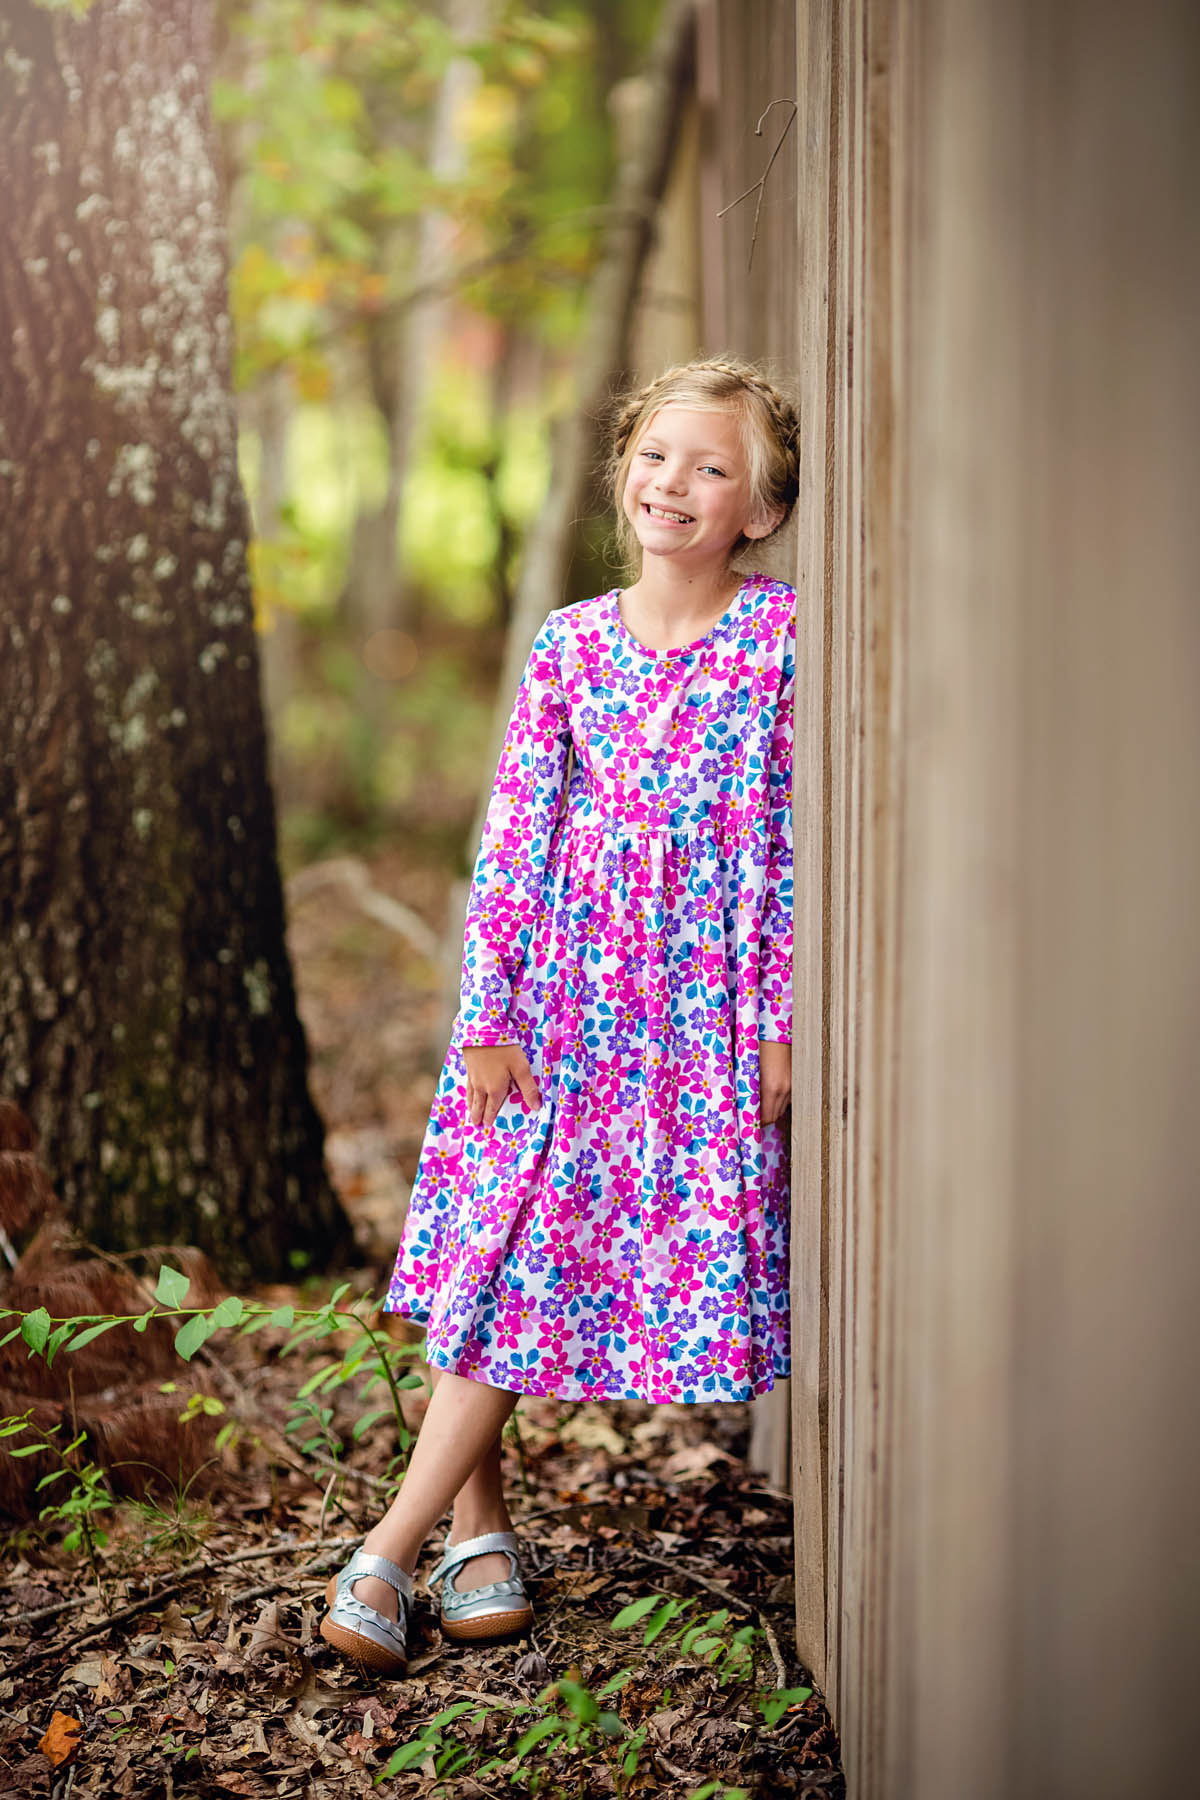 Fun And Comfortable Fall Styles For Kids